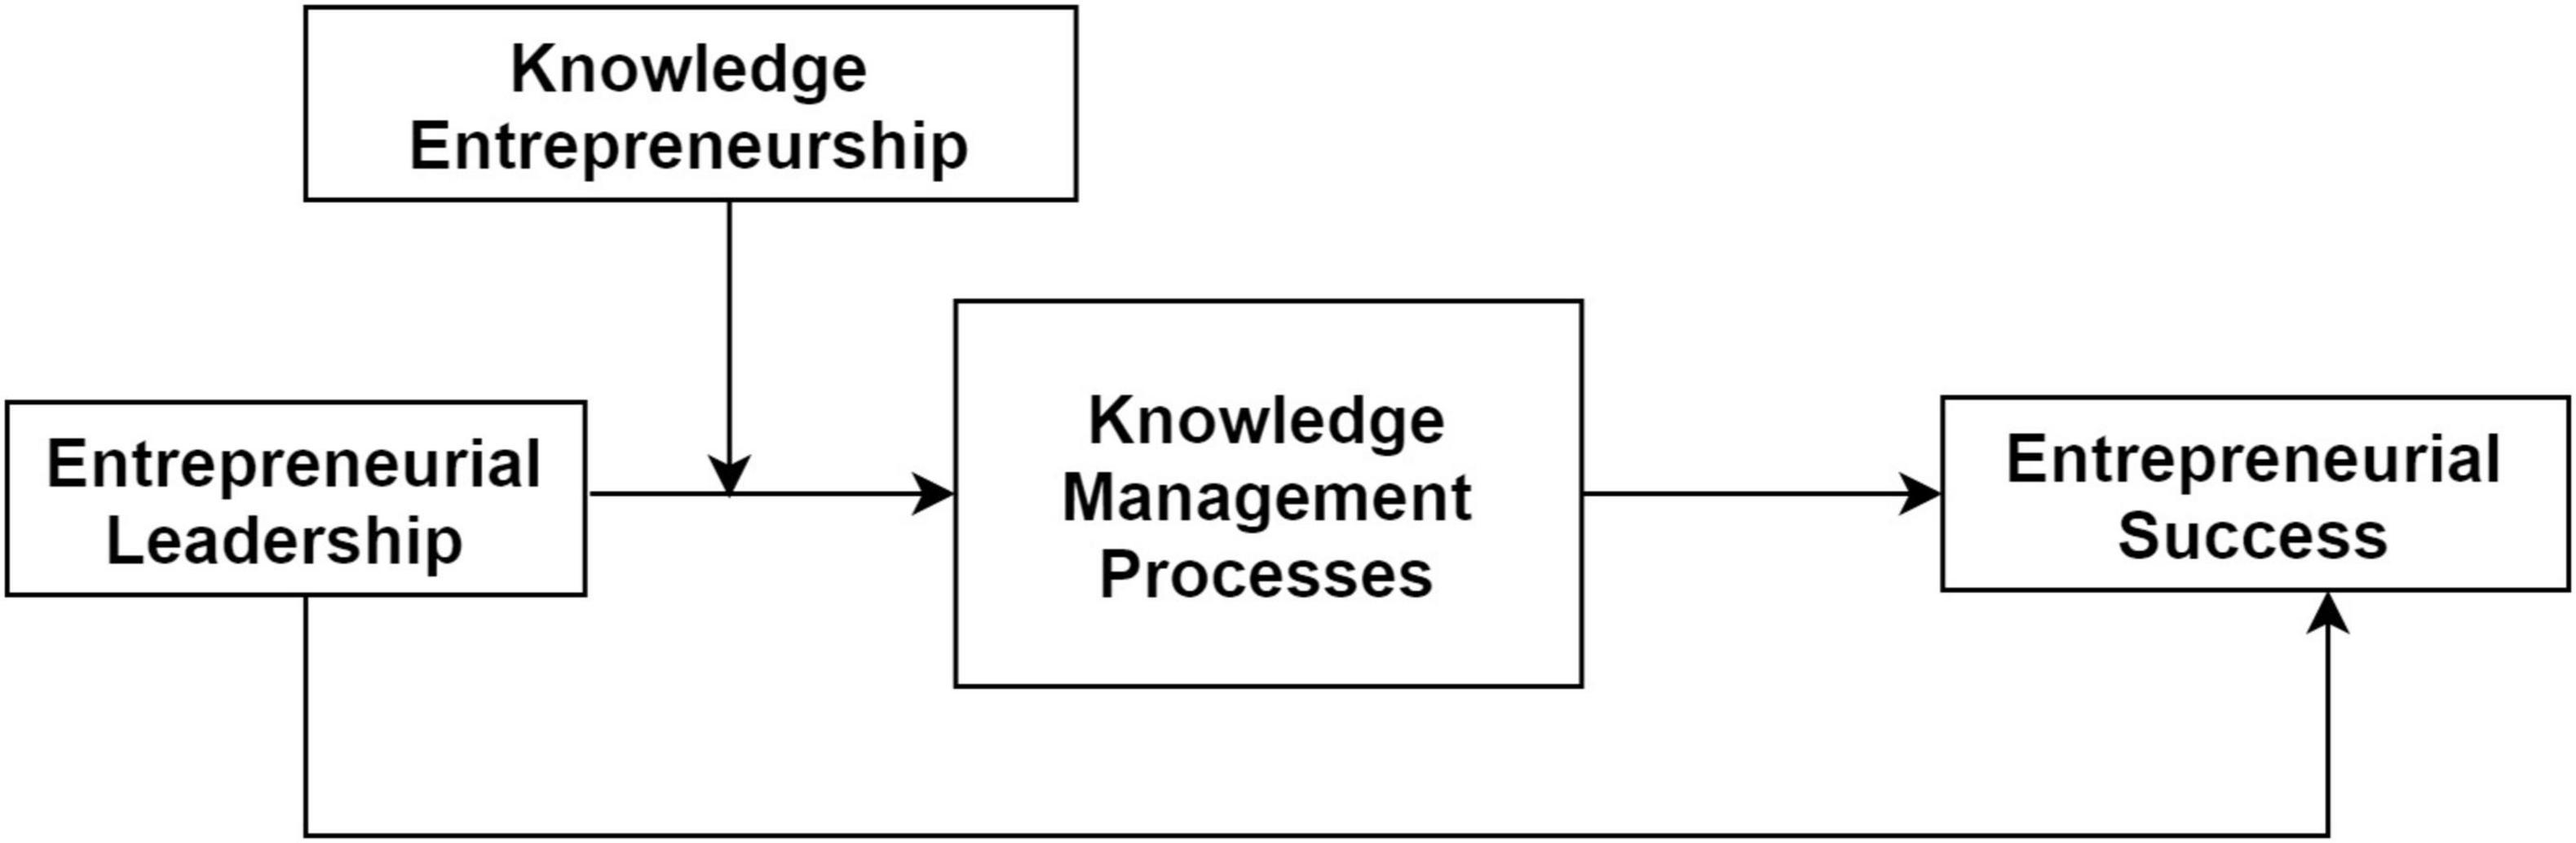 PDF) Knowledge Transfer and Use as Predictors of Law Firm